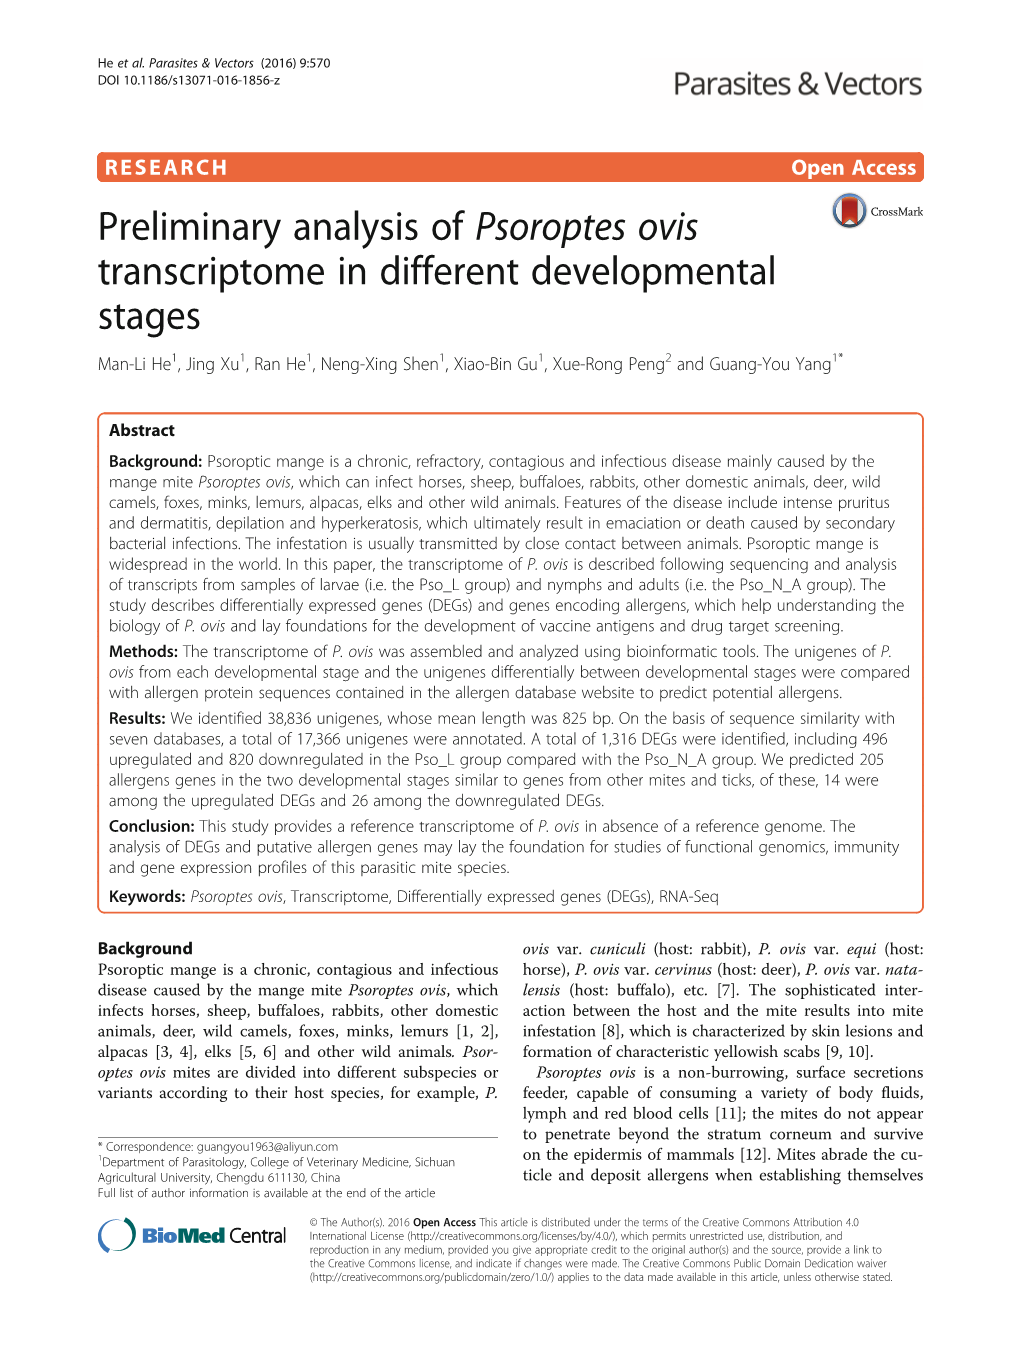 Preliminary Analysis of Psoroptes Ovis Transcriptome in Different